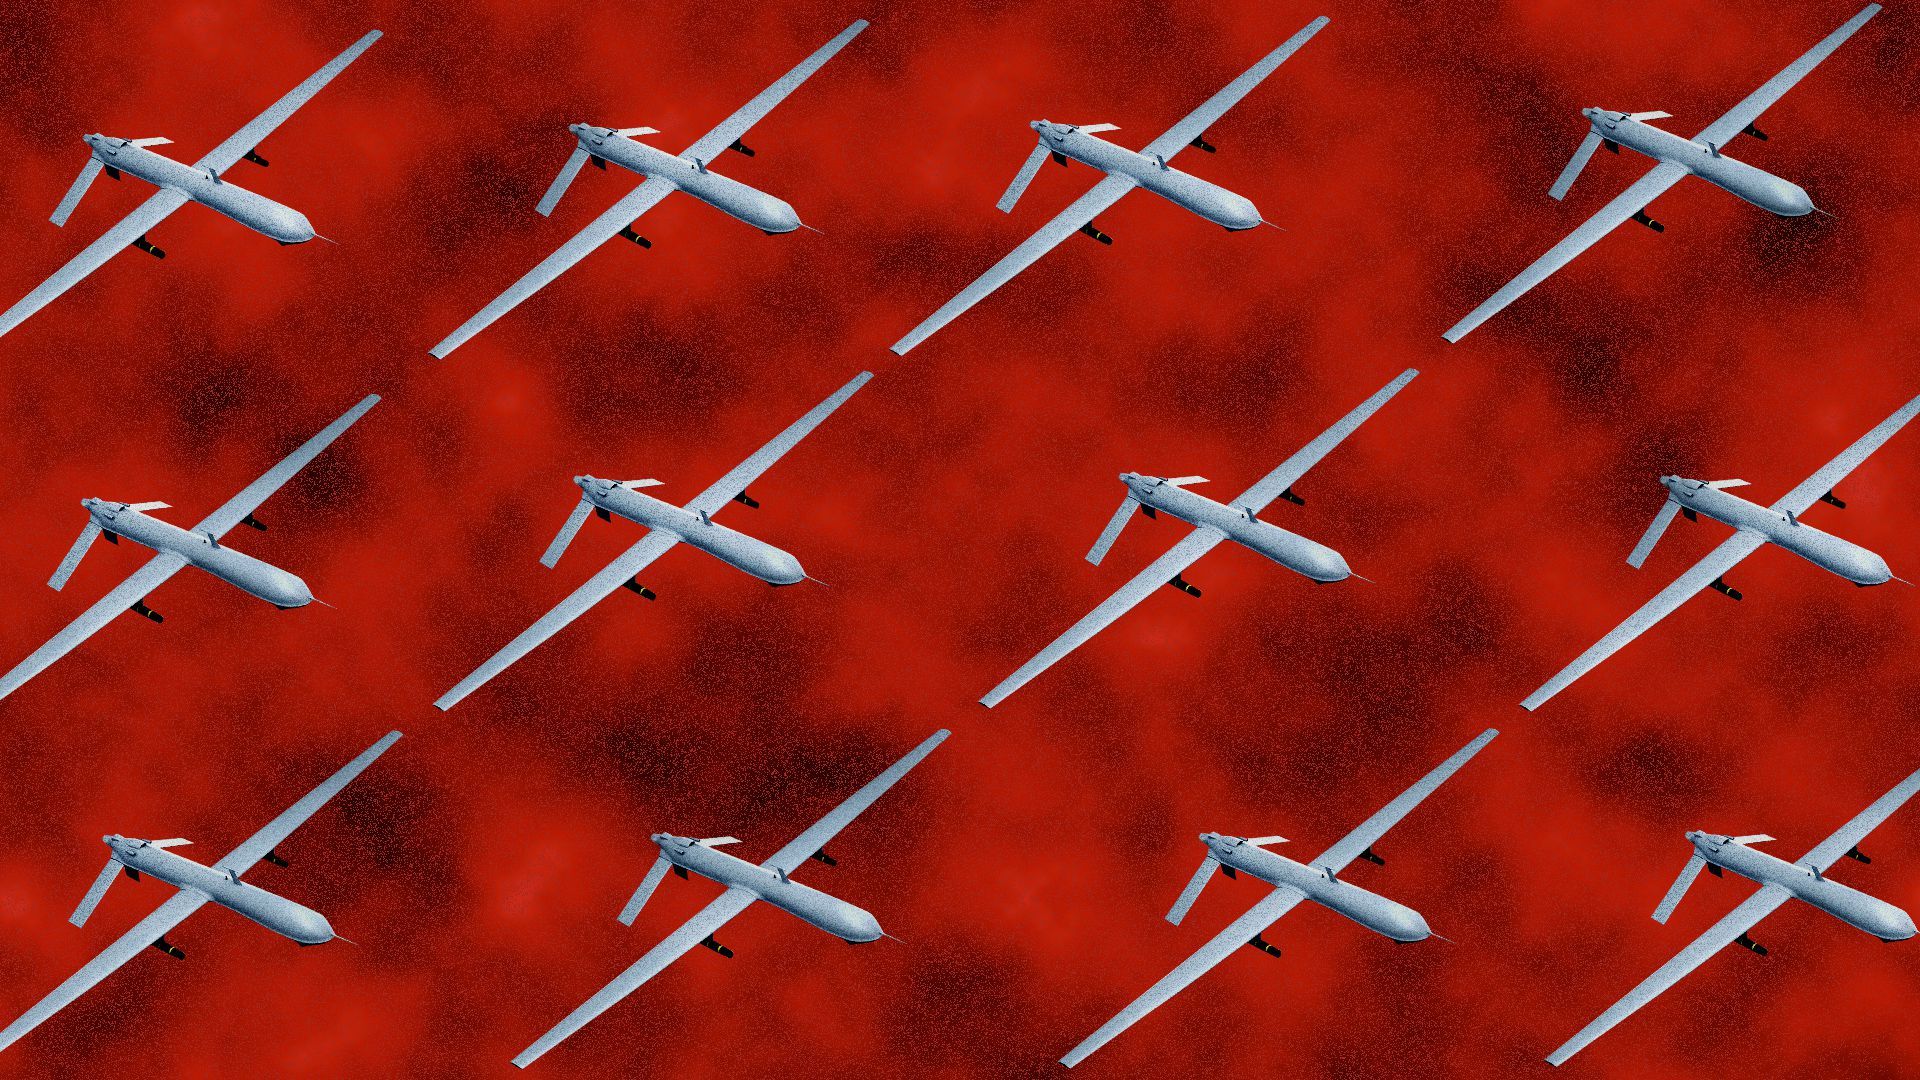 Illustration of a pattern of military drones.